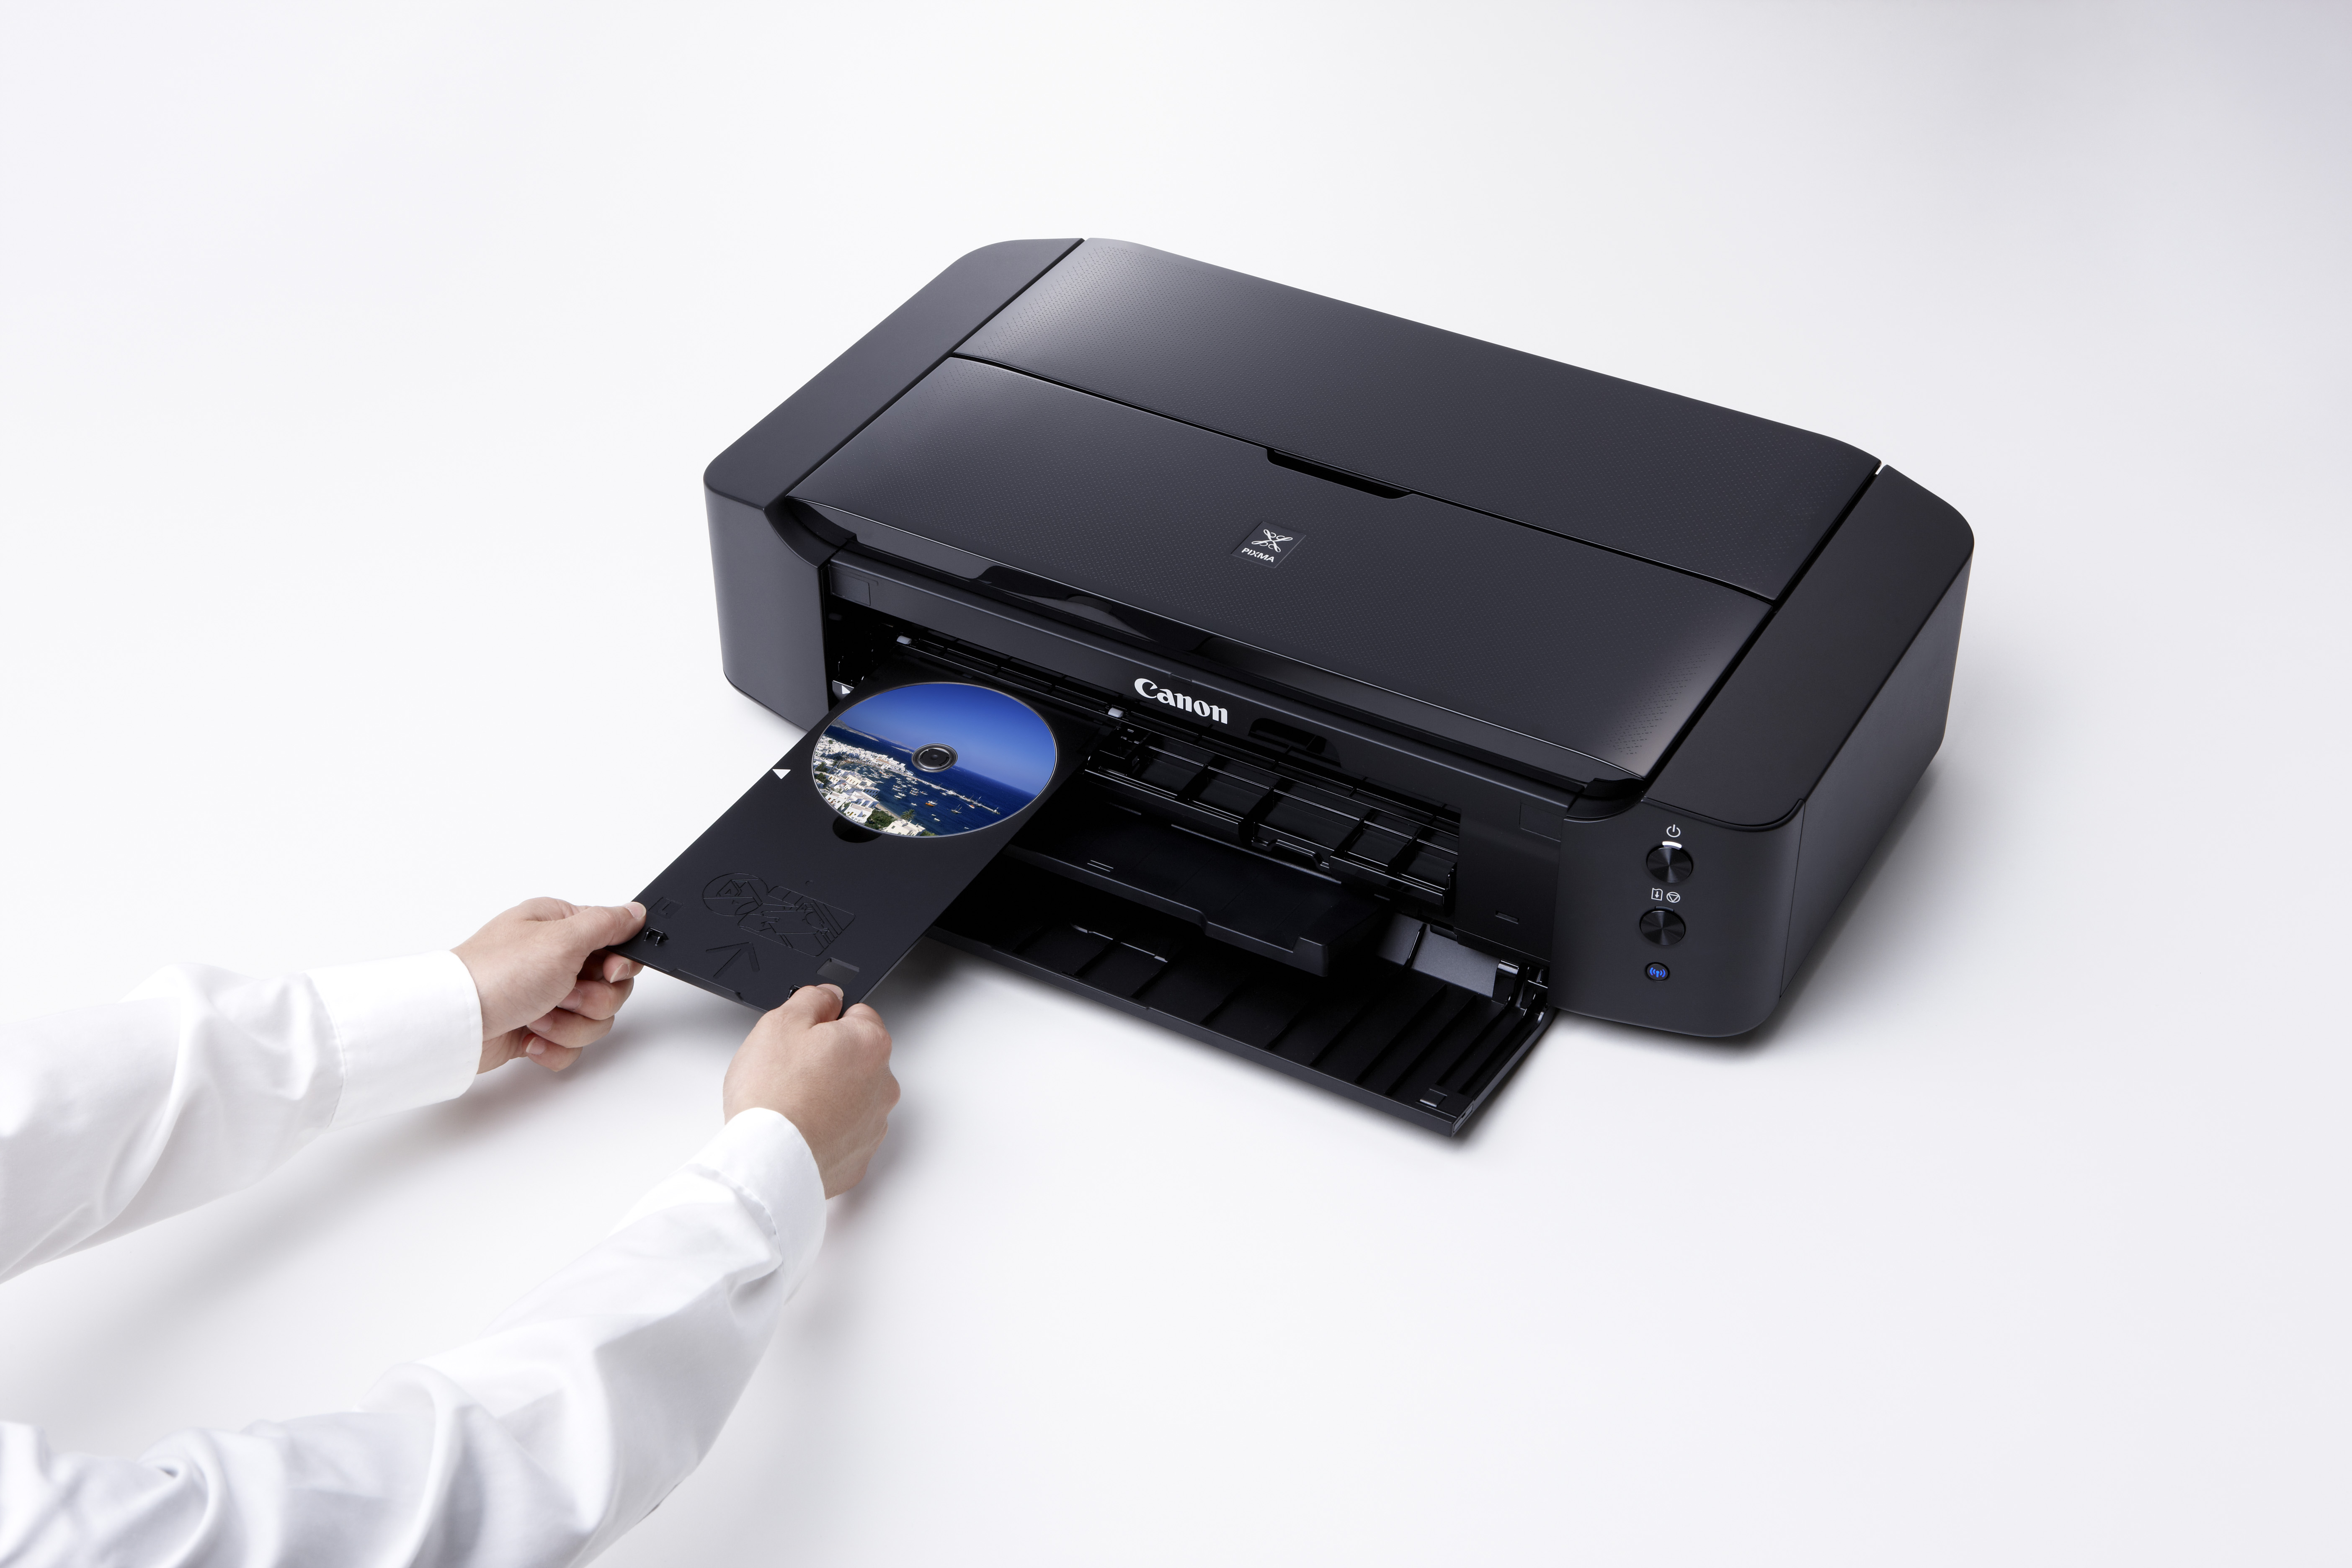 Print your memories direct to Disc